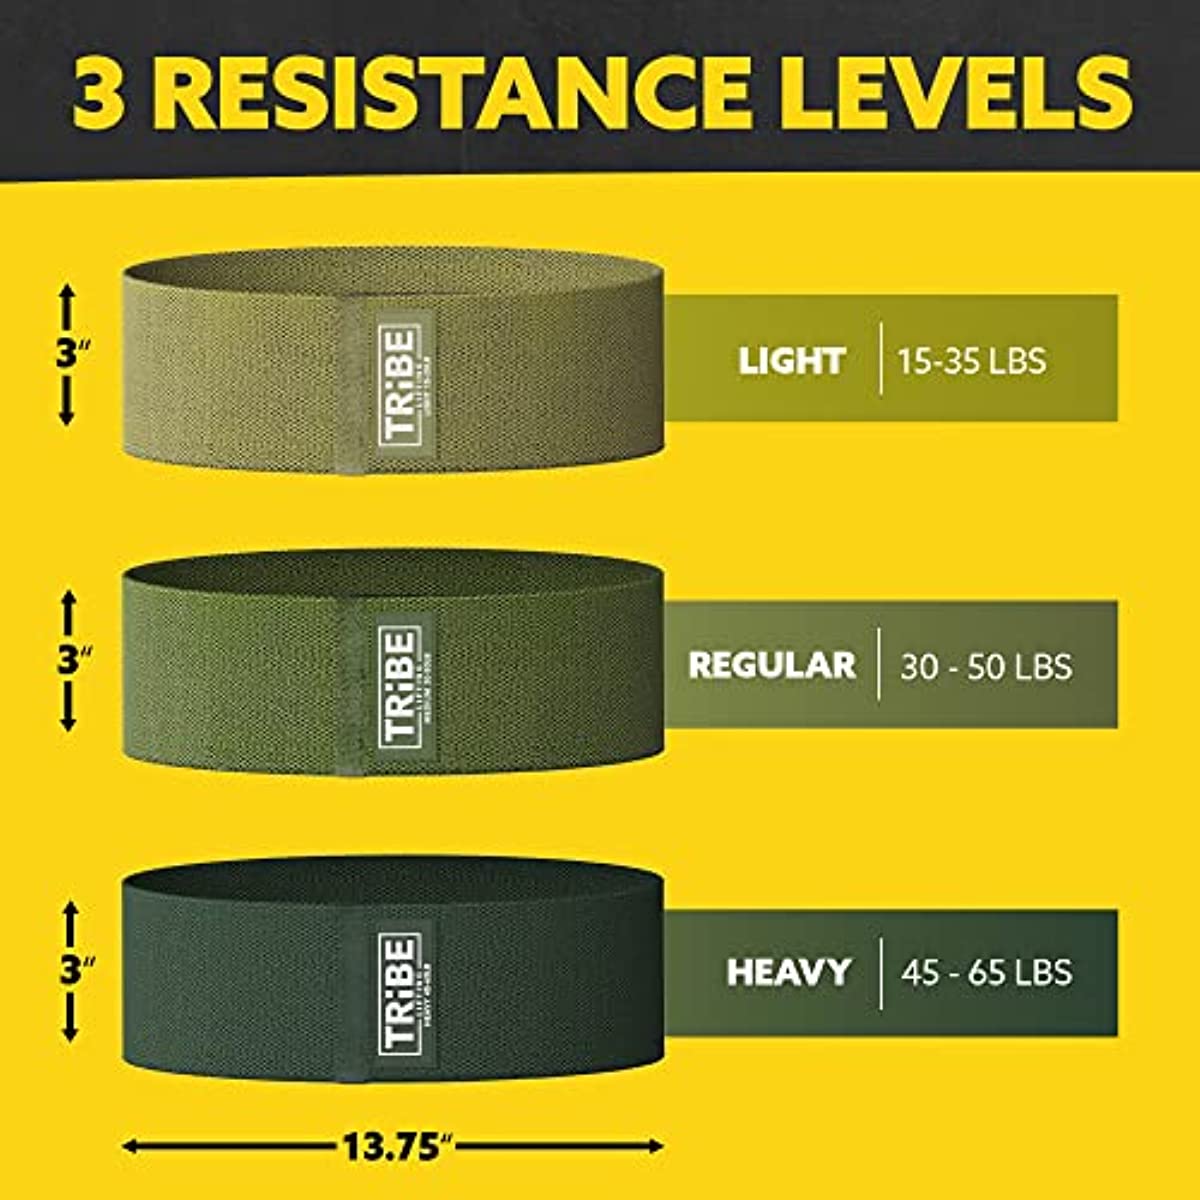 Fabric Resistance Bands for Working Out - Booty Bands for Women and Men - Exercise Bands Resistance Bands Set - Workout Bands Resistance Bands for Legs